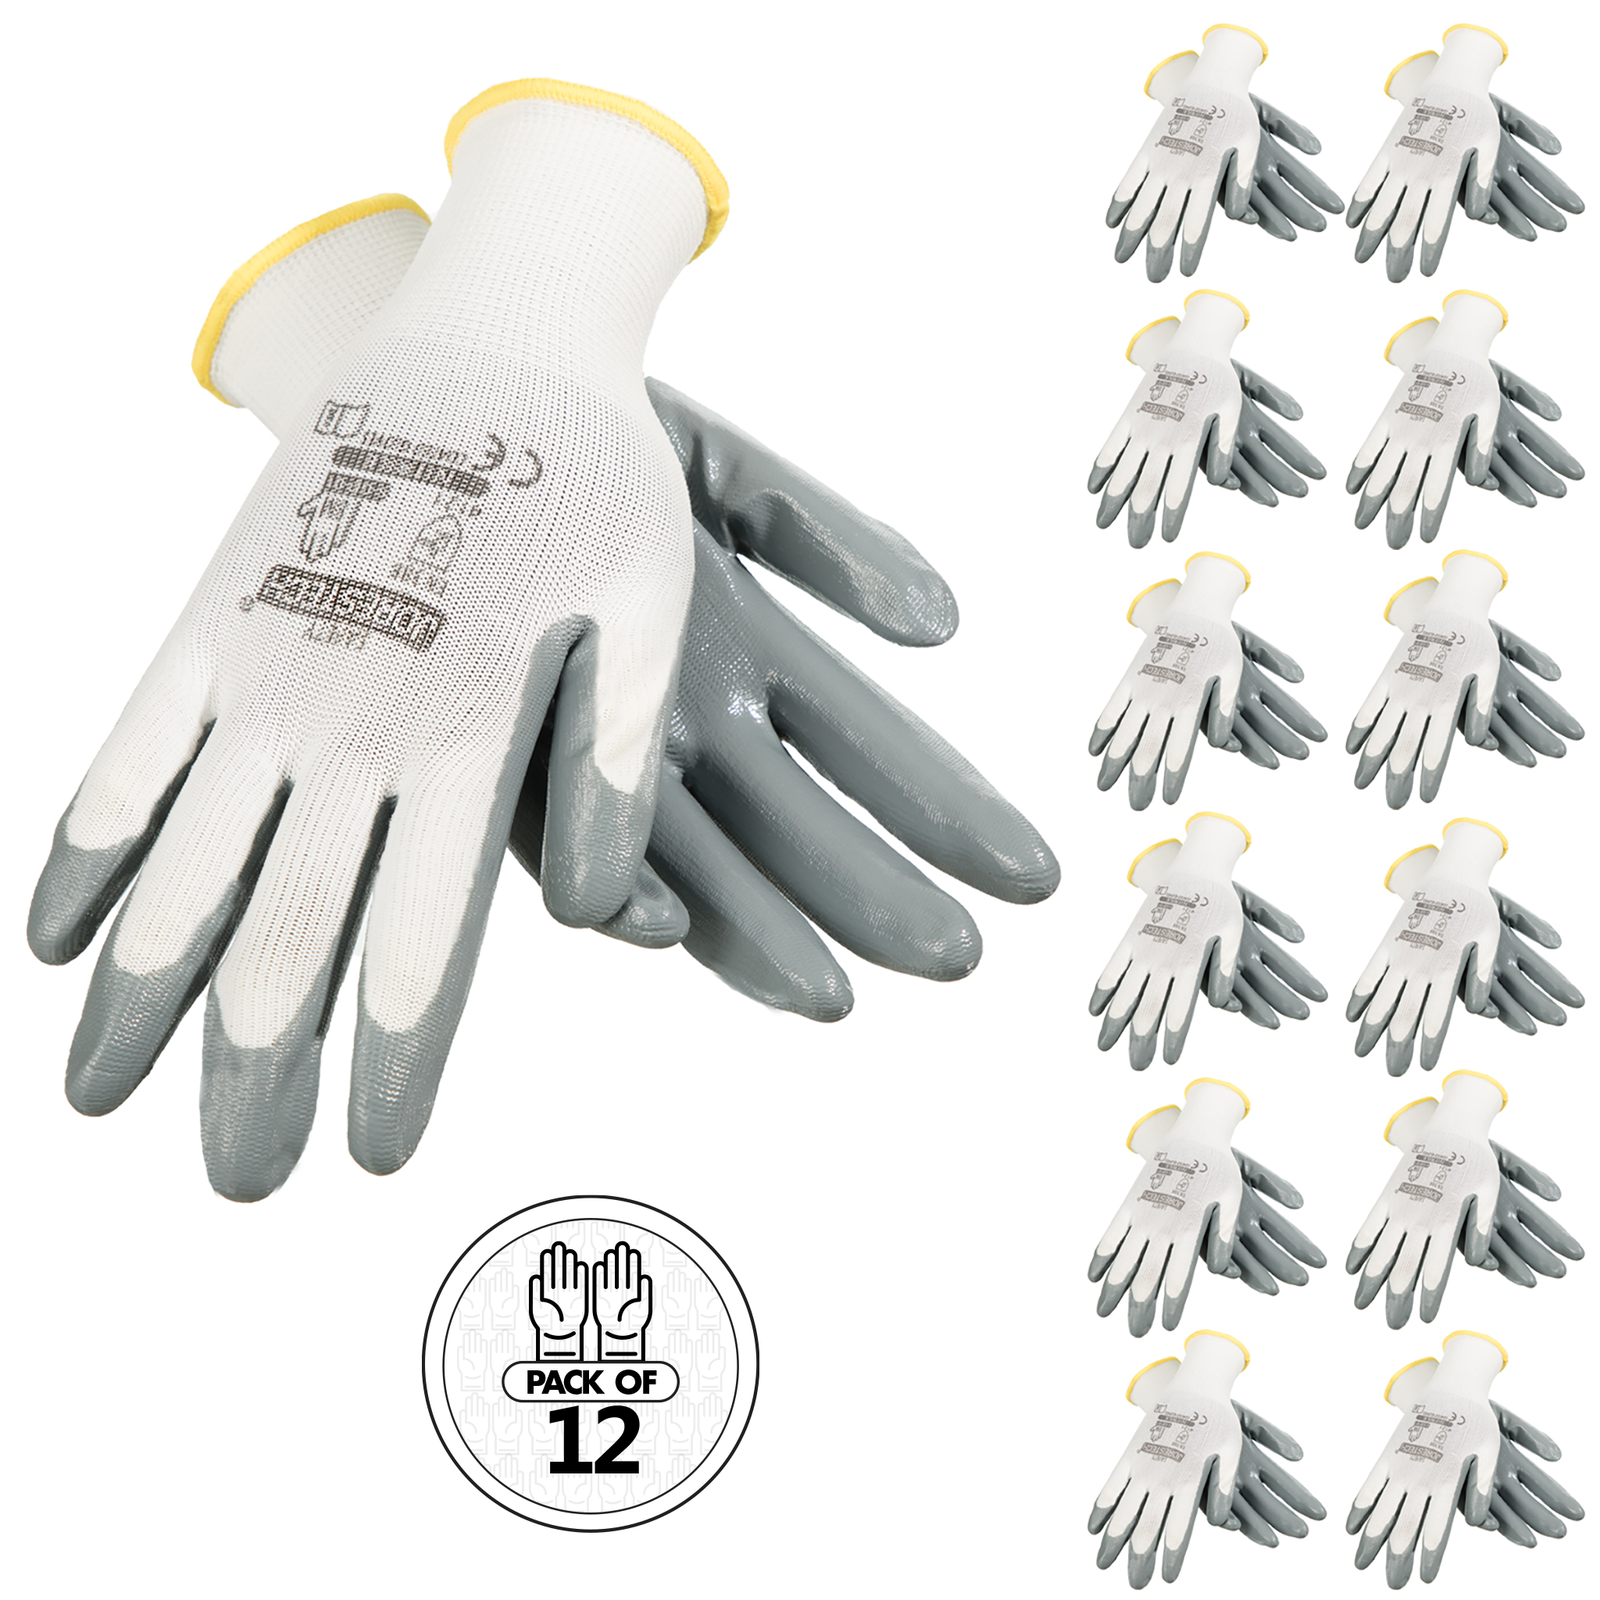 Cut Resistant Polyurethane Dipped Work Gloves | Technopack Safety & PPE XL by JORESTECH S-GD-02